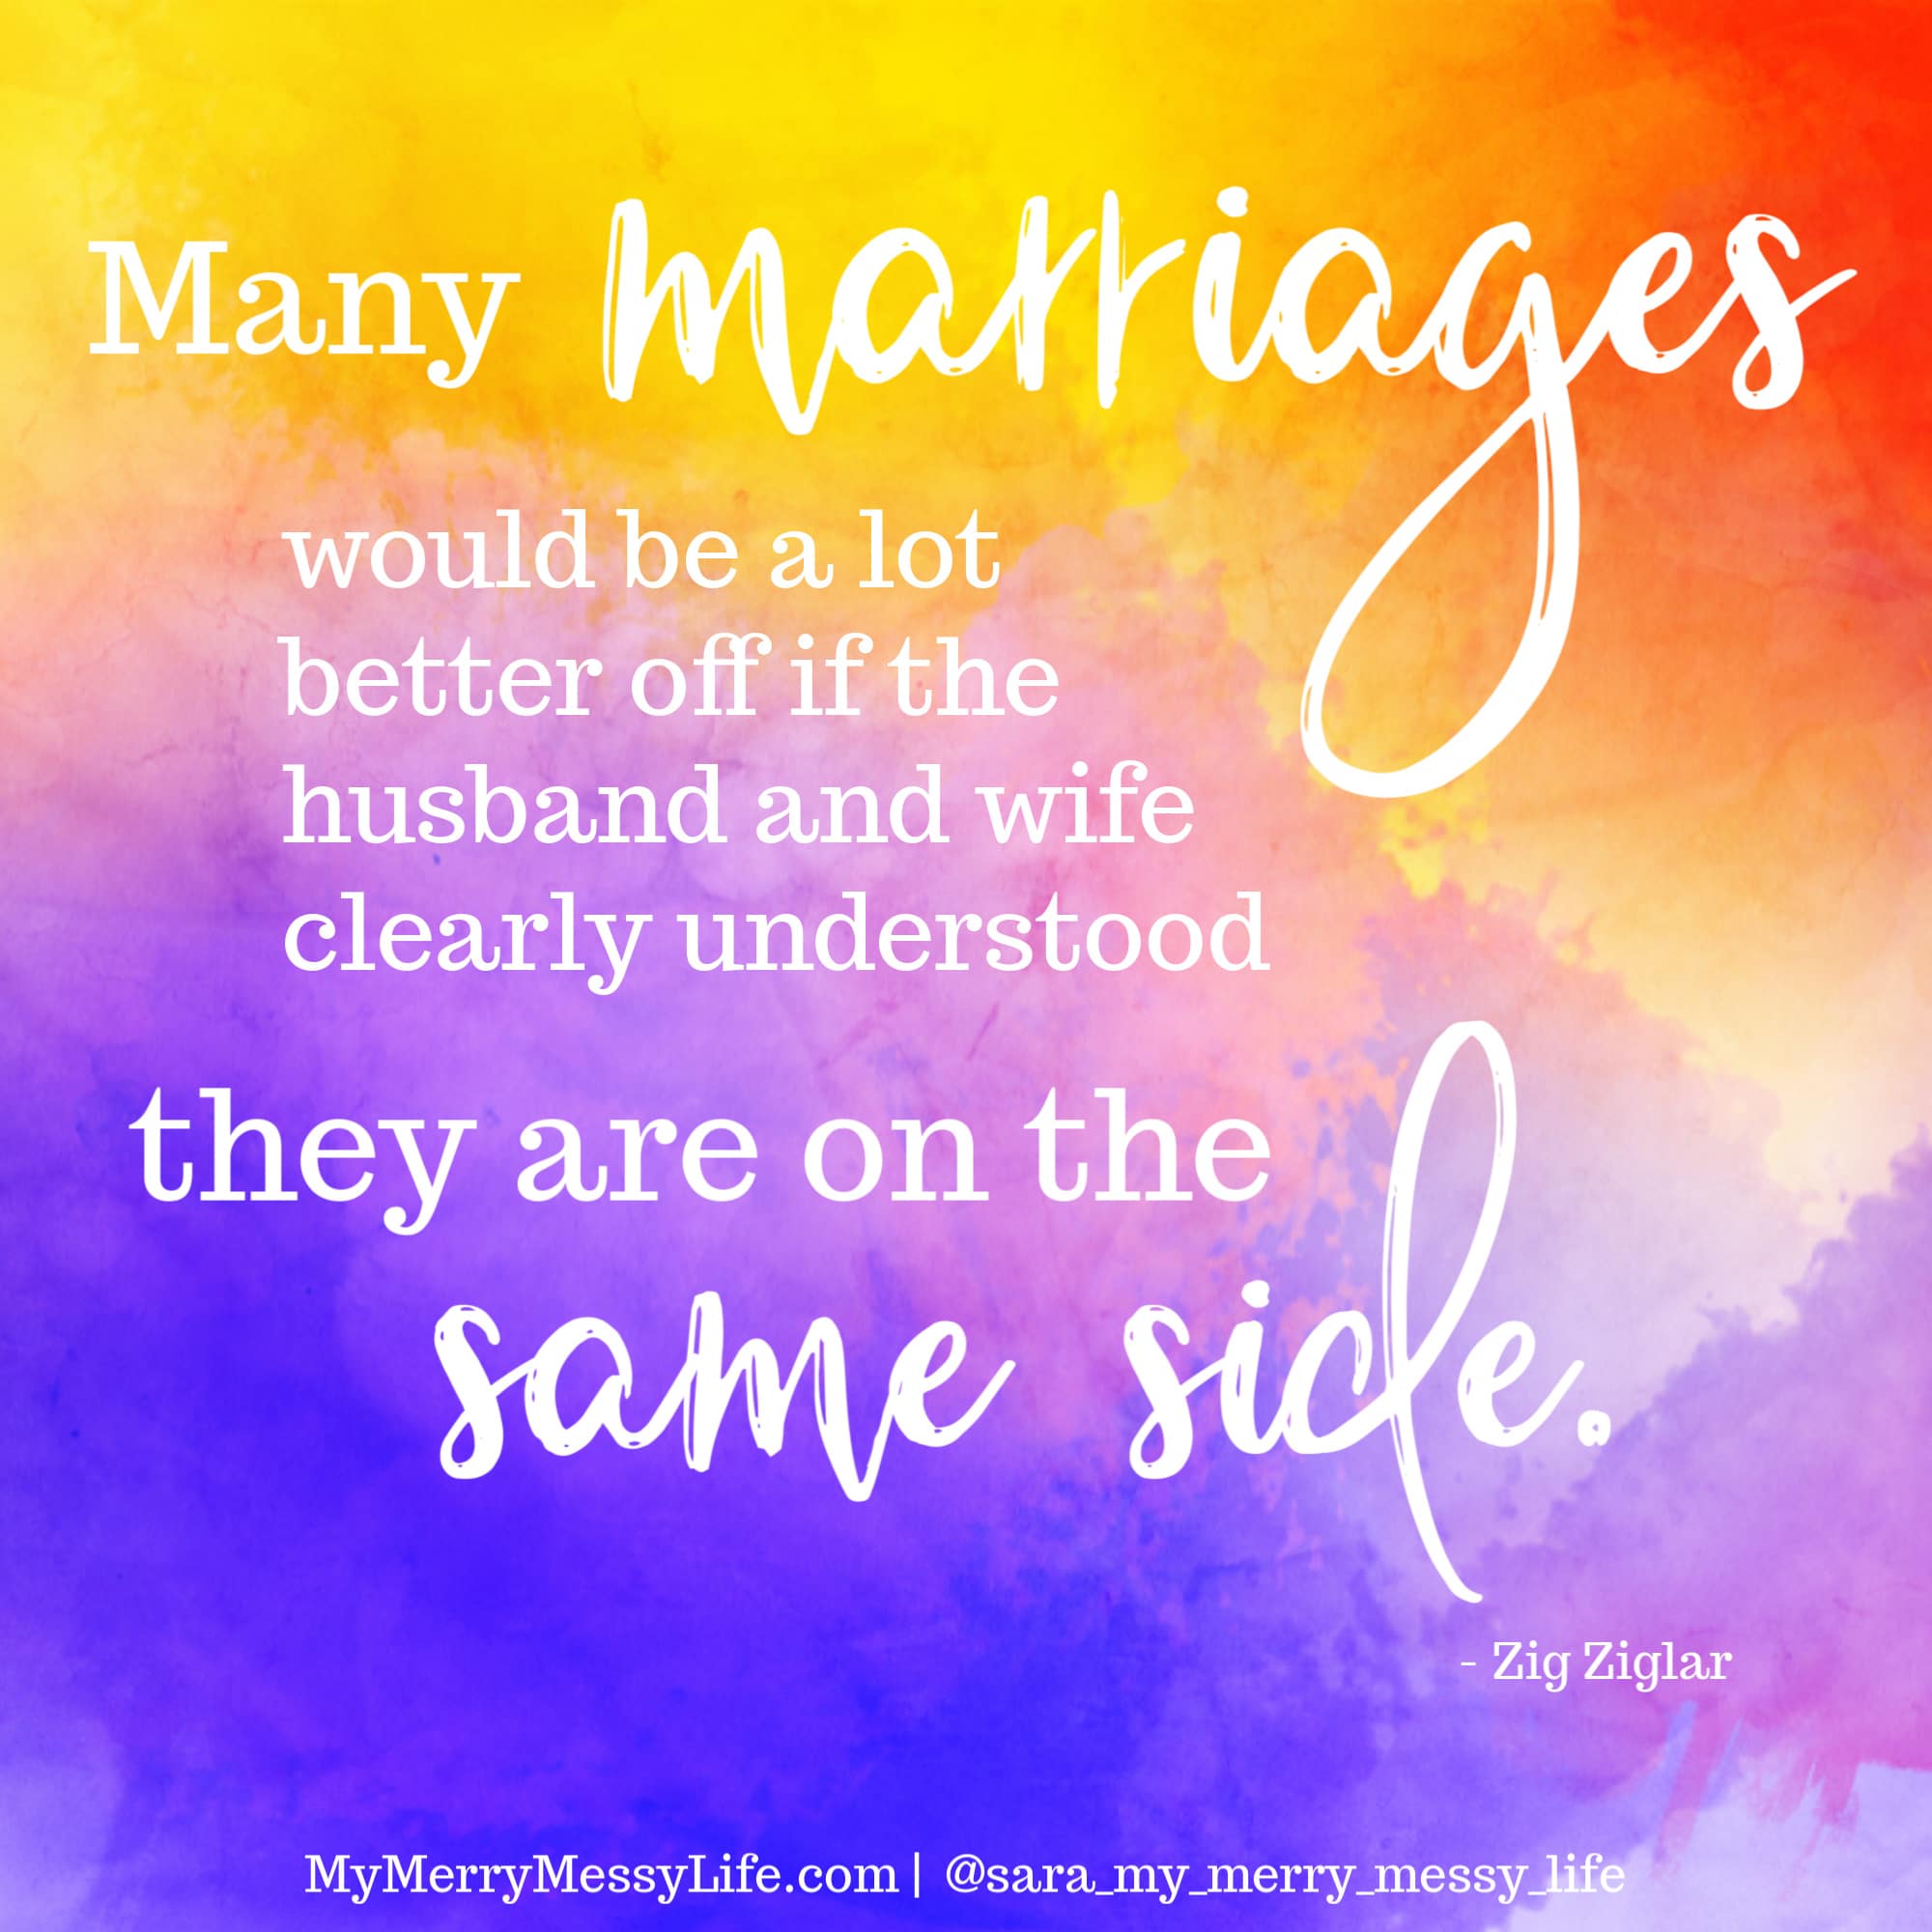 Many marriages would be a lot better off if the husband and wife clearly understood they are on the same side. - Zig Ziglar